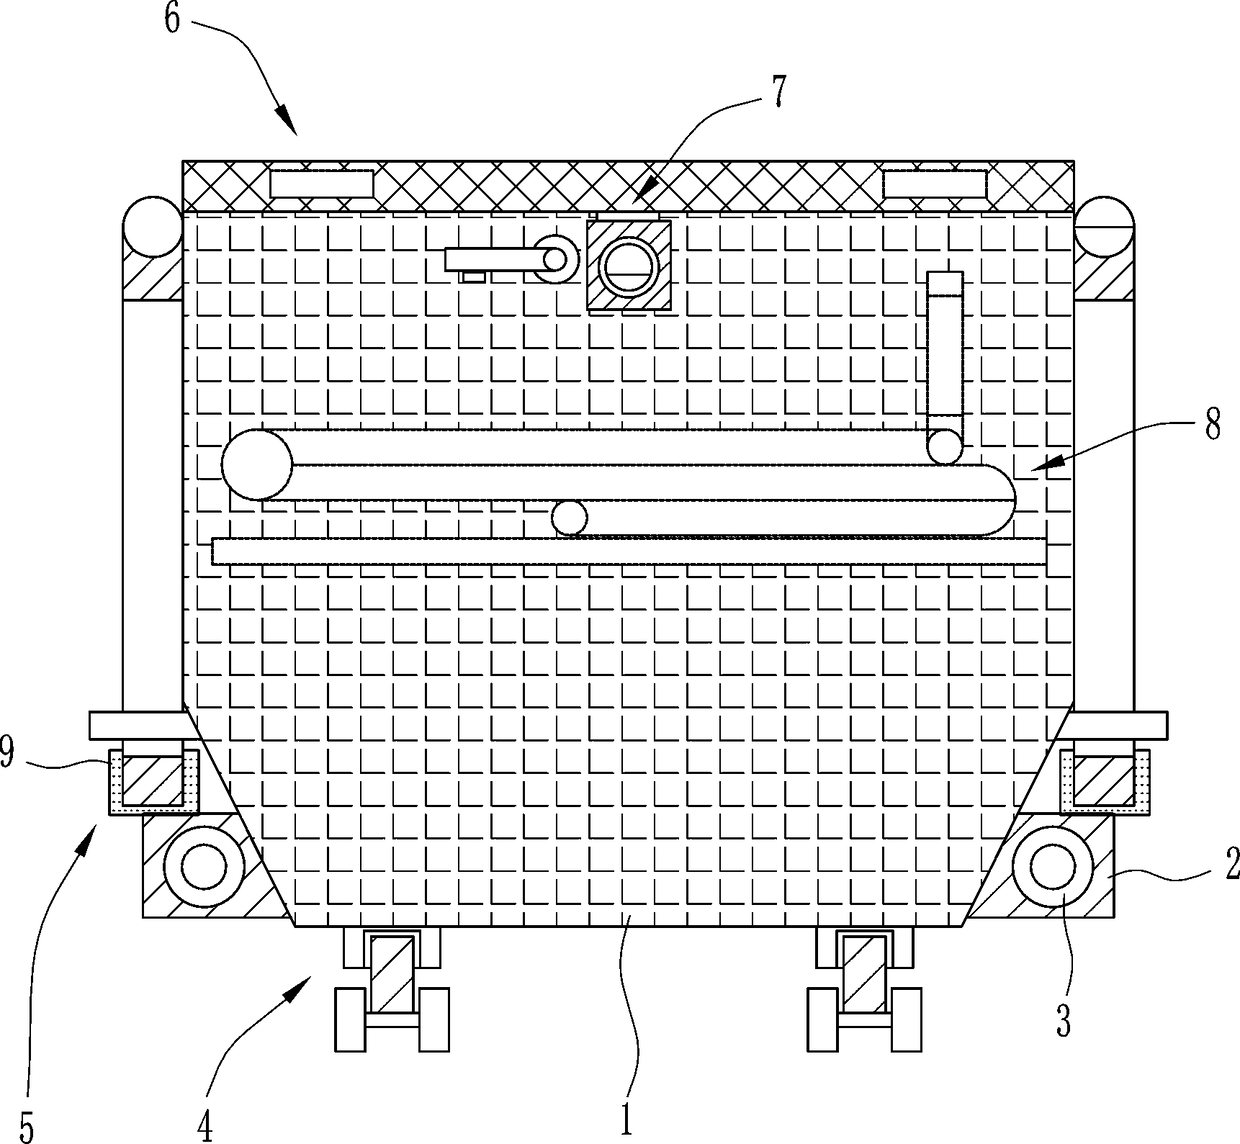 Detachable goods storage basket for electric vehicle